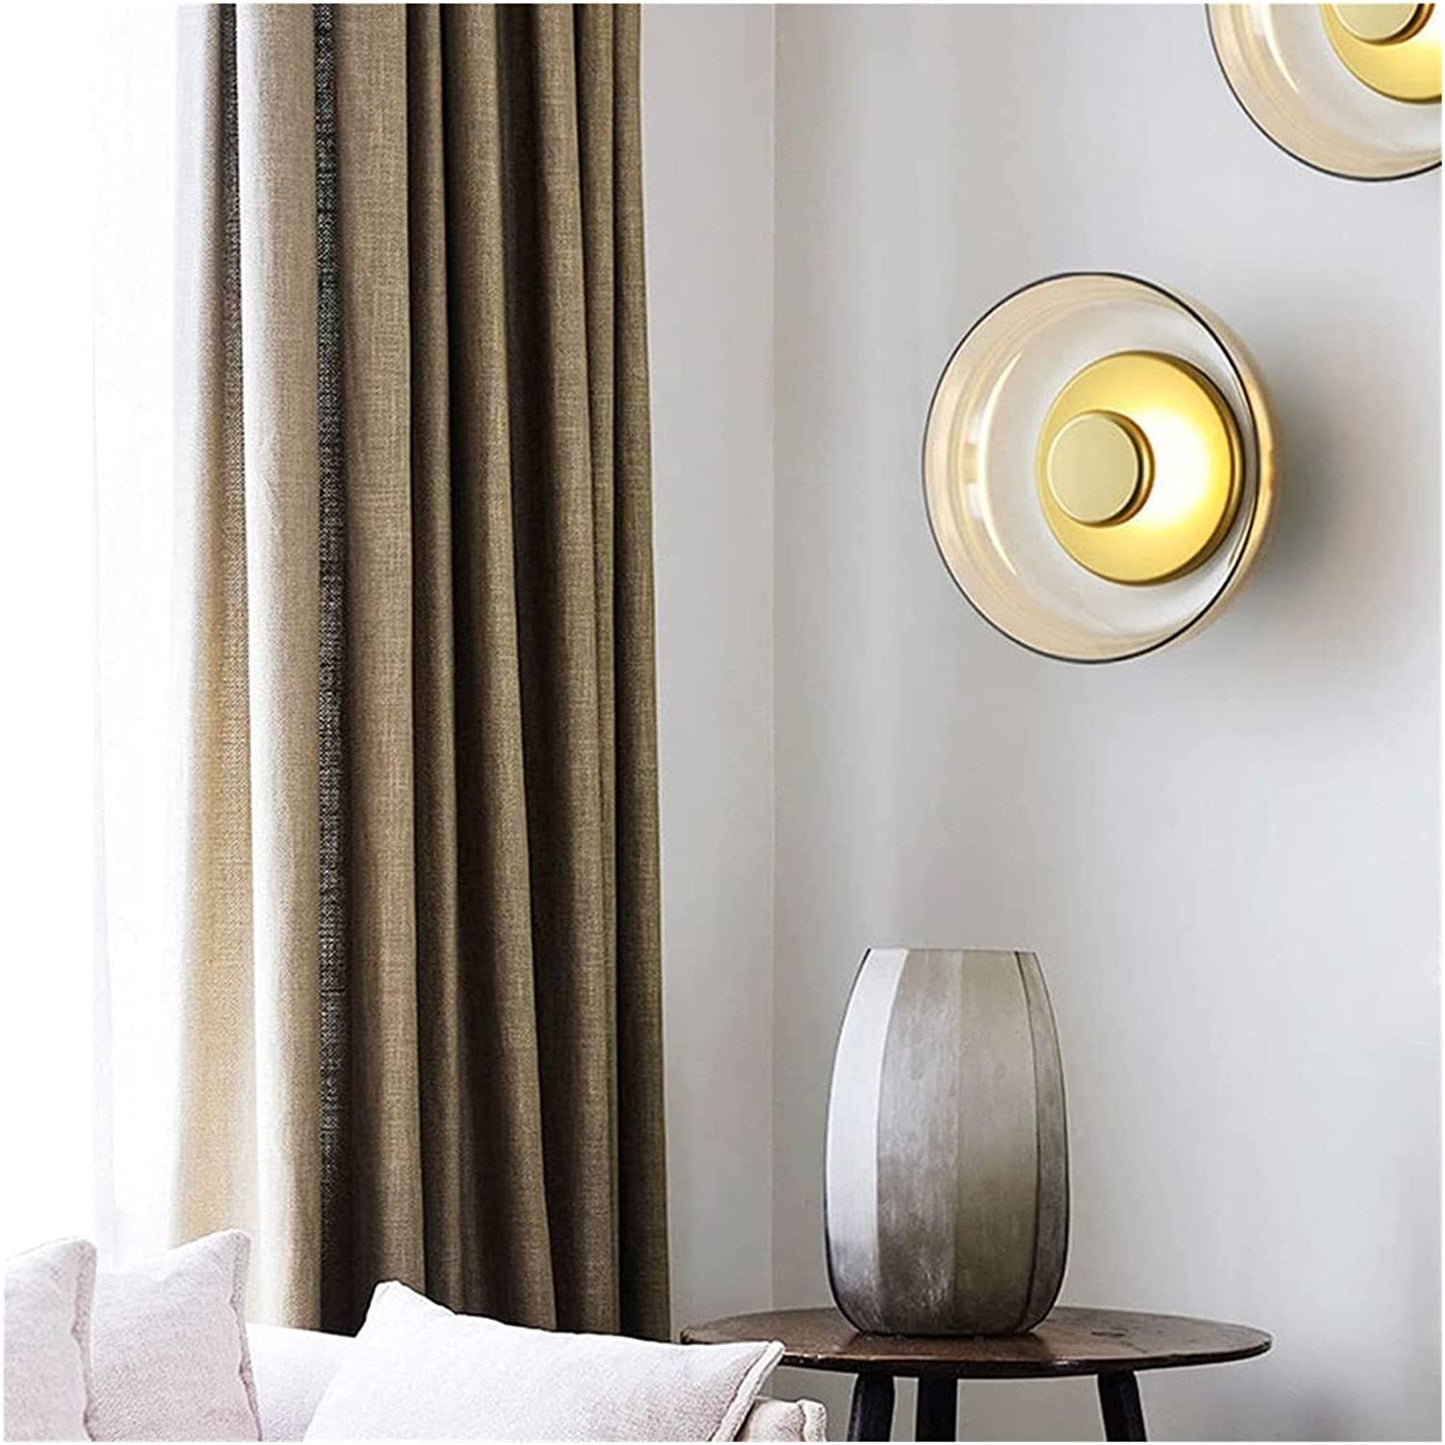 Luxury Gold Bedside Wall Lamp by Gloss (B806)